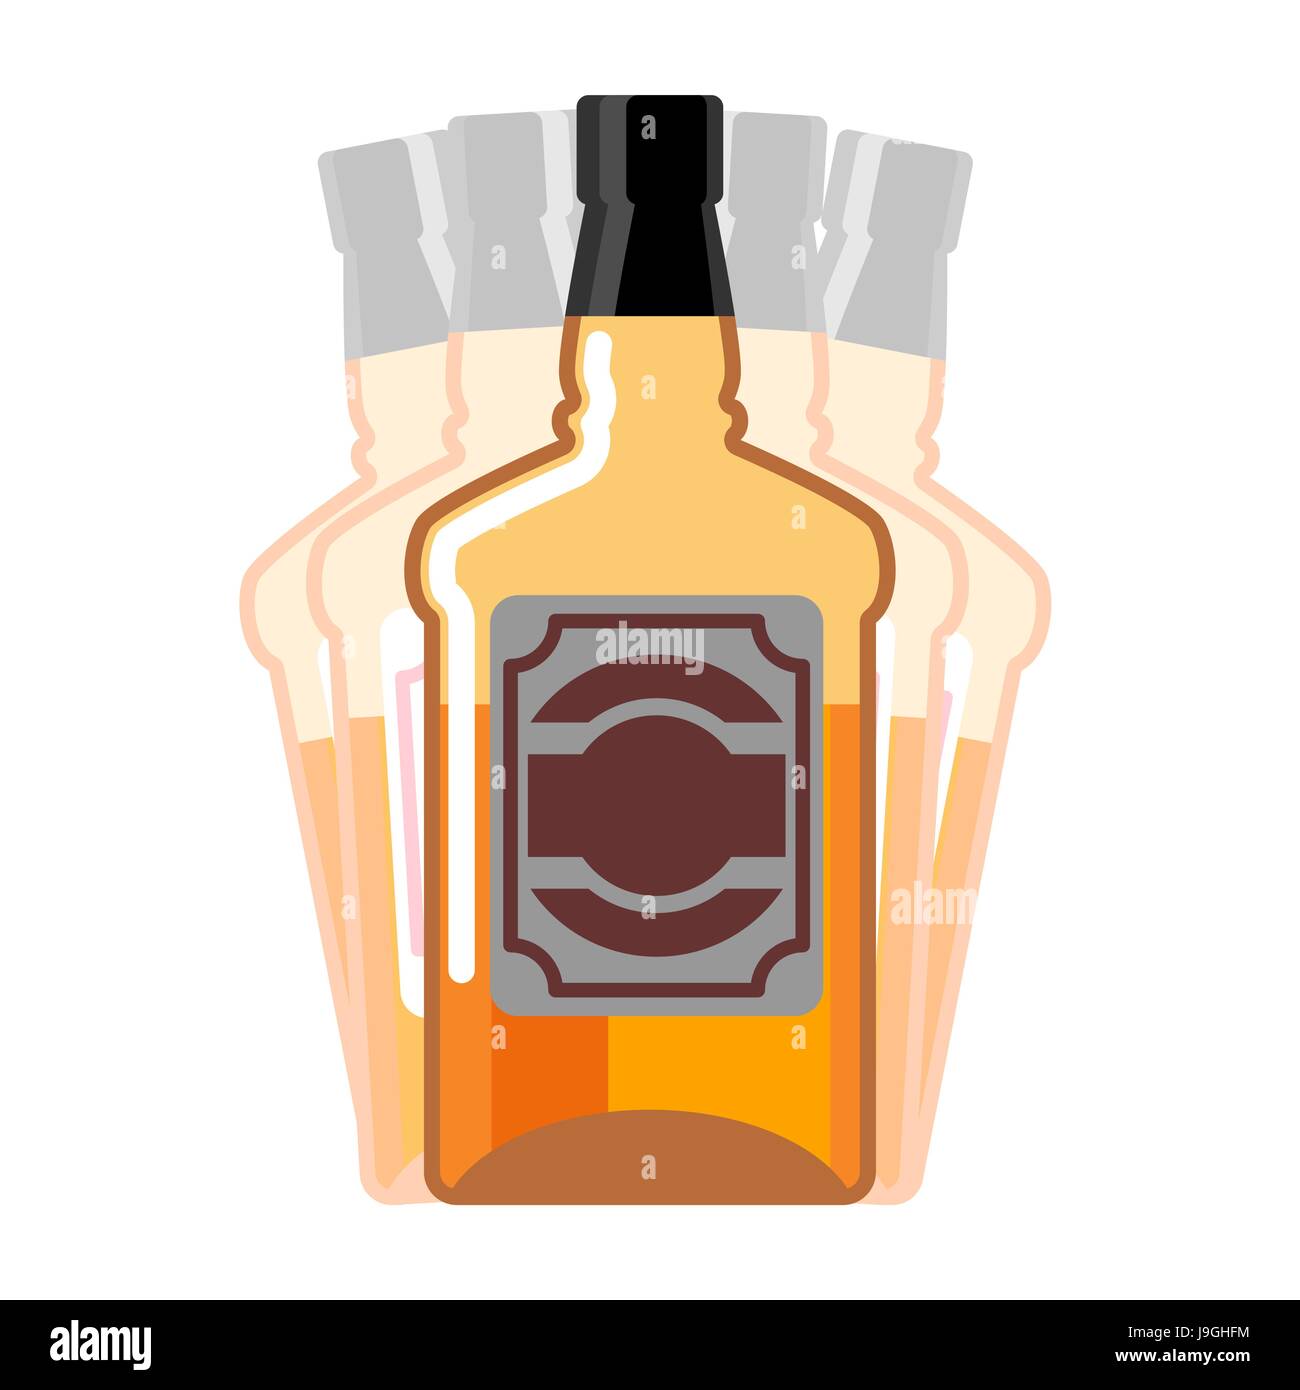 Drunkenness. Whiskey Bottle seeing double. Drink Scotch hallucination. Tequila on white background. Alcohol illustration Stock Vector